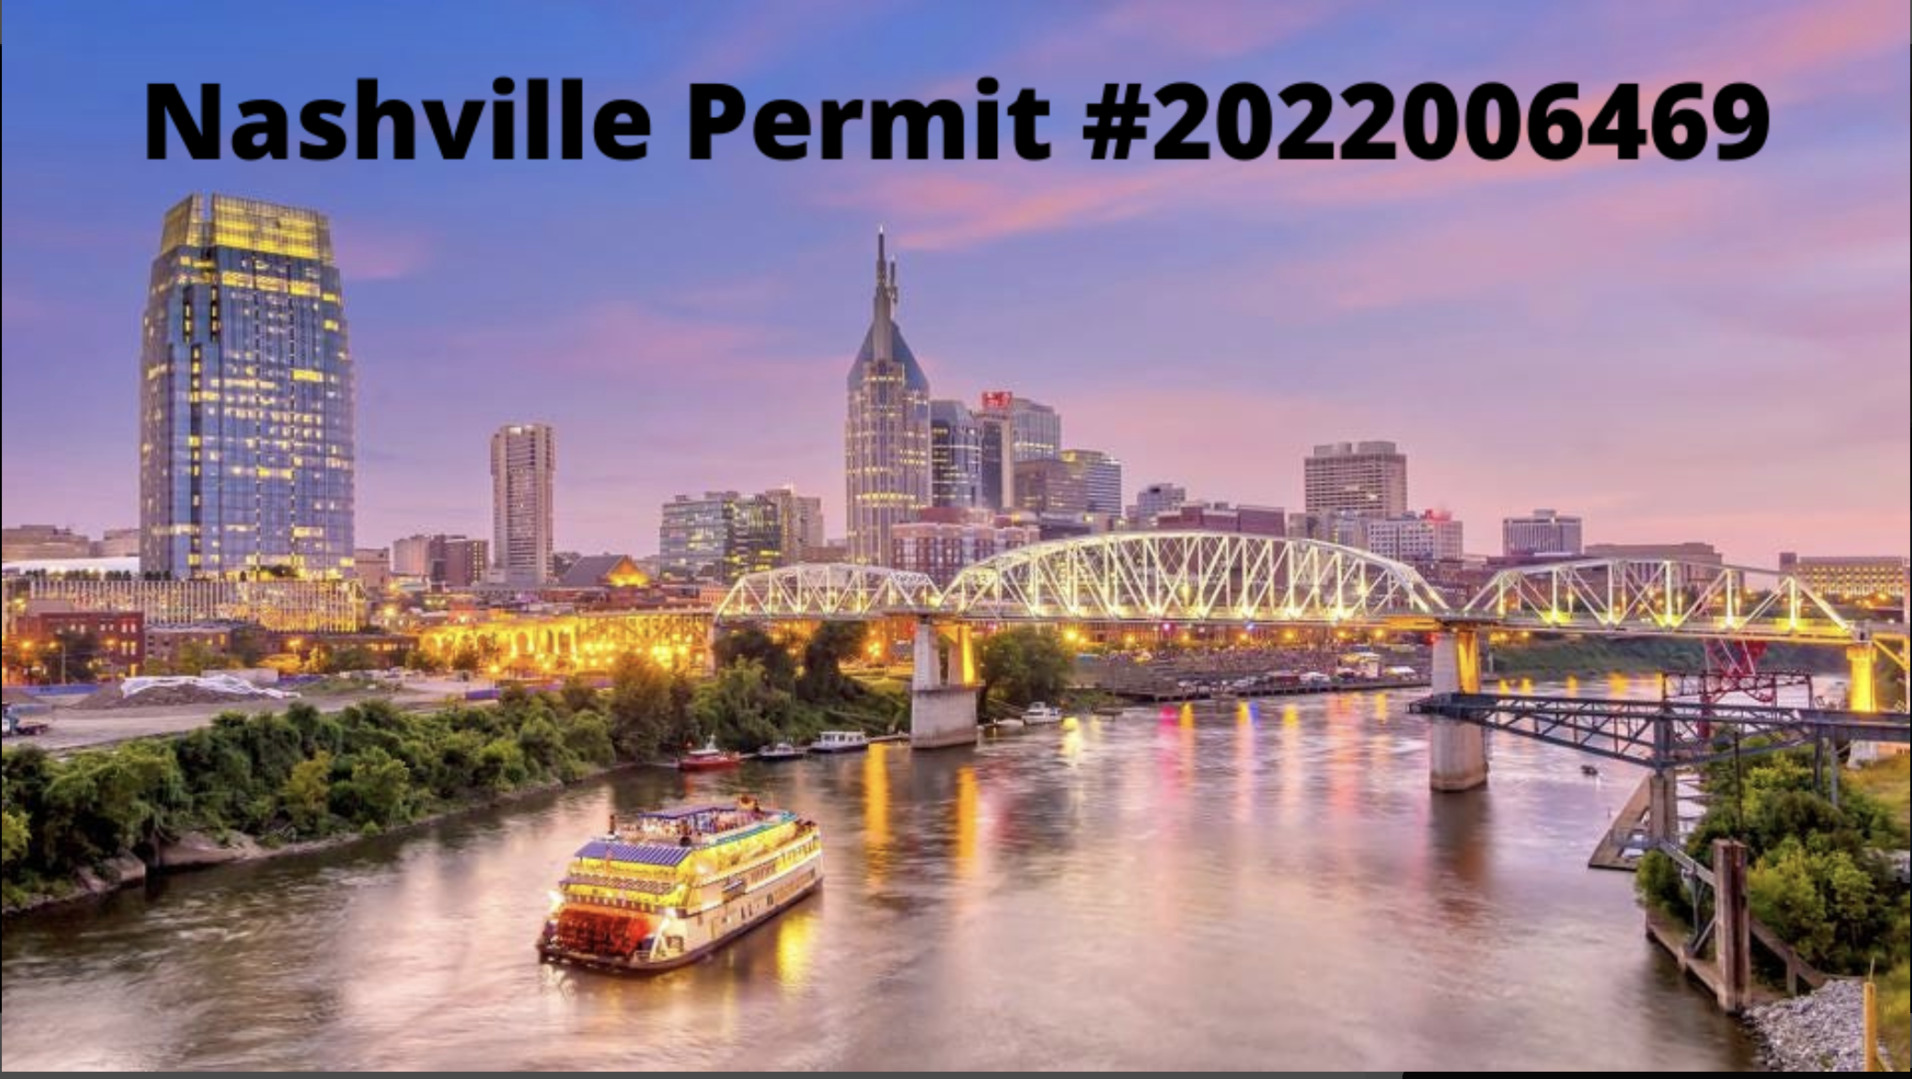 Nashville Permit for 2nd Unit: issued in 2022 followed by:2022006469